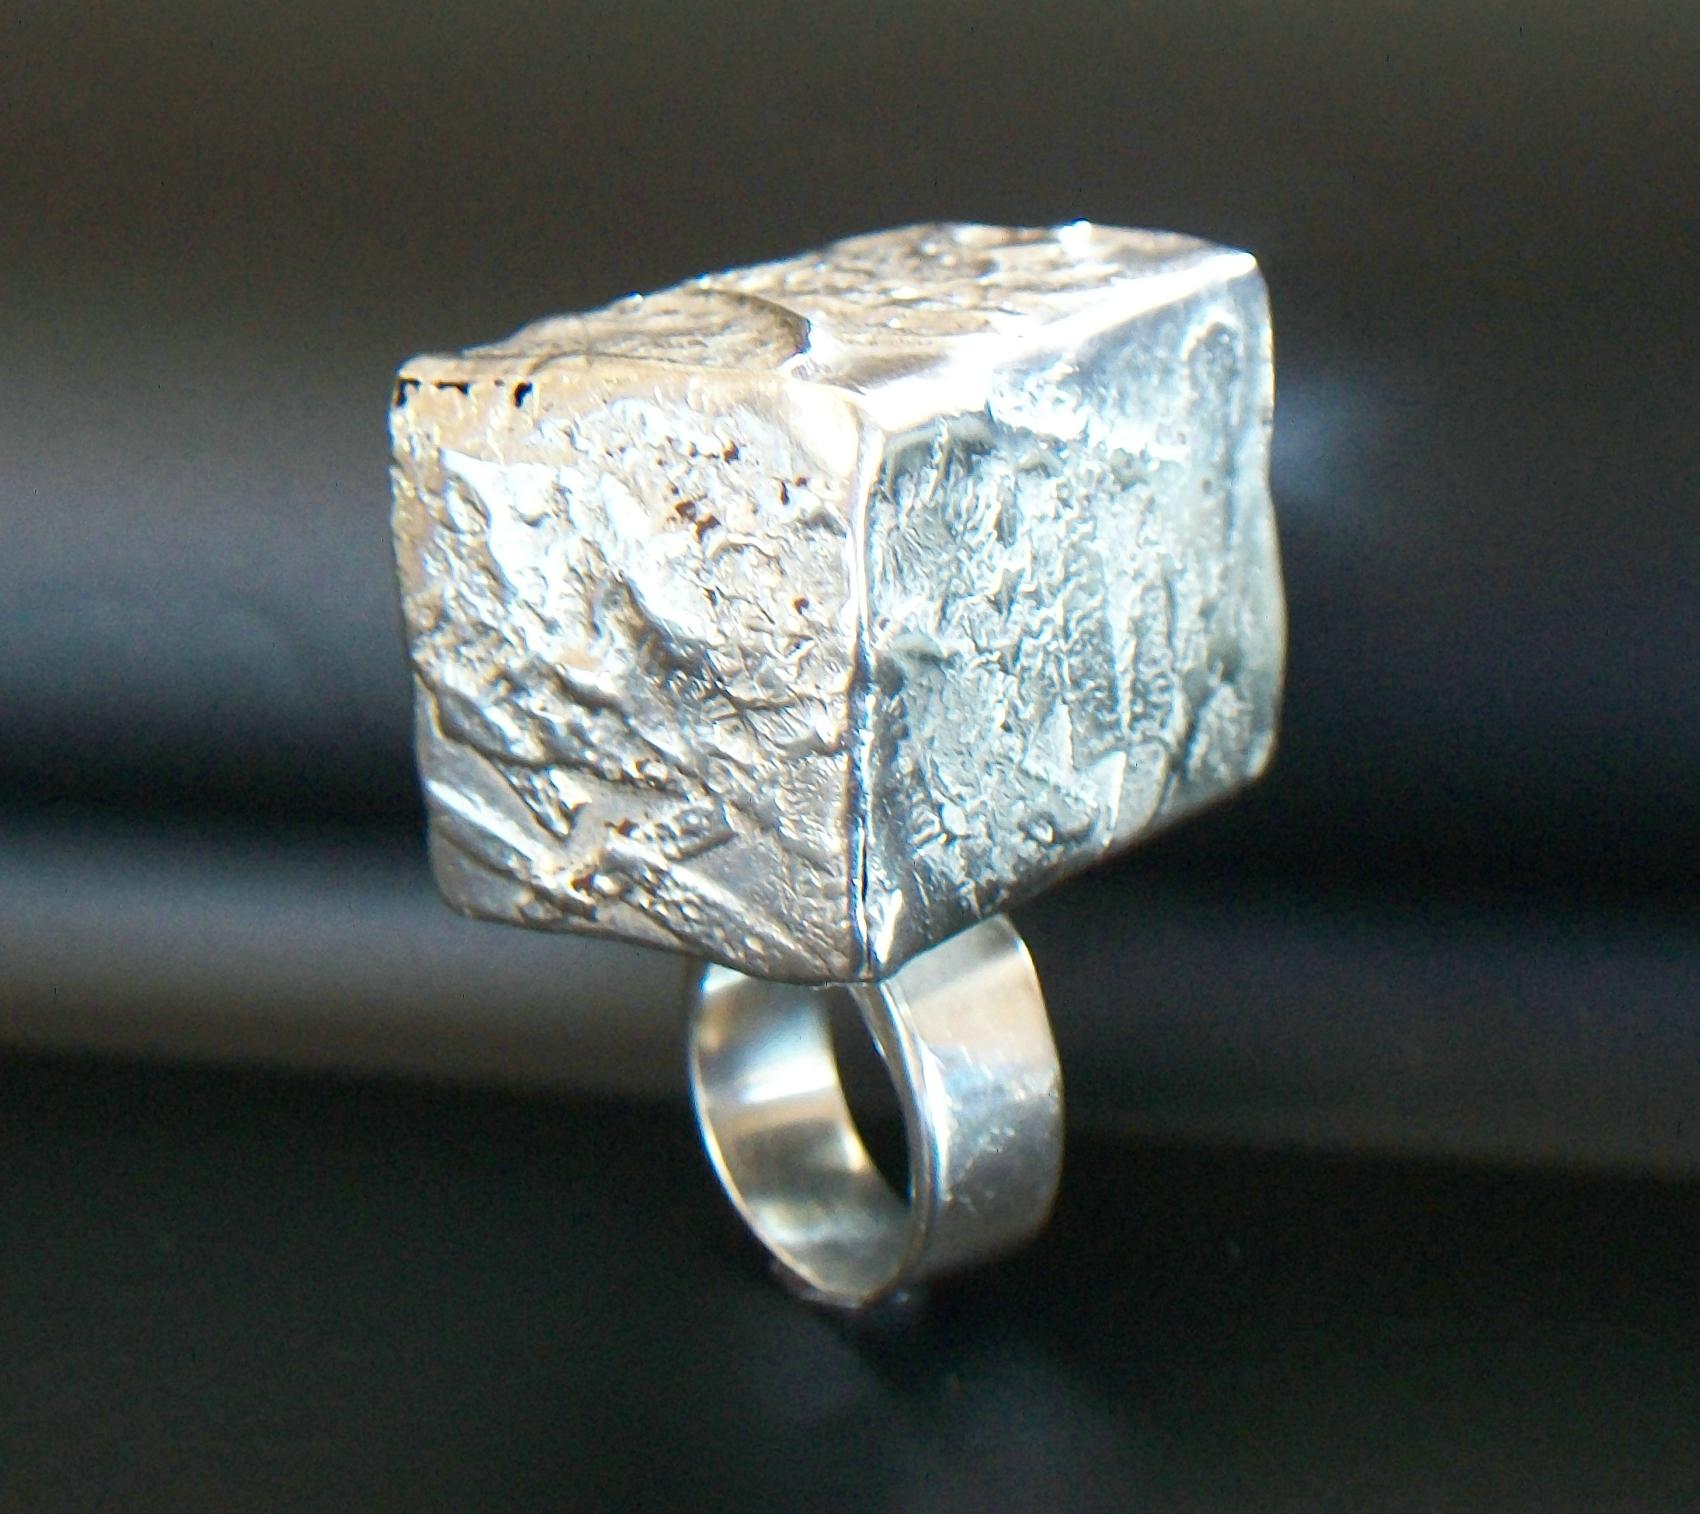 Massive Brutalist/Modernist artisan fine silver statement ring - large hollow cube design with textured finish (reminiscent of Mid Century architectural panels) set at an angle to the solid band - unsigned - '950' to the inner band (as photographed)